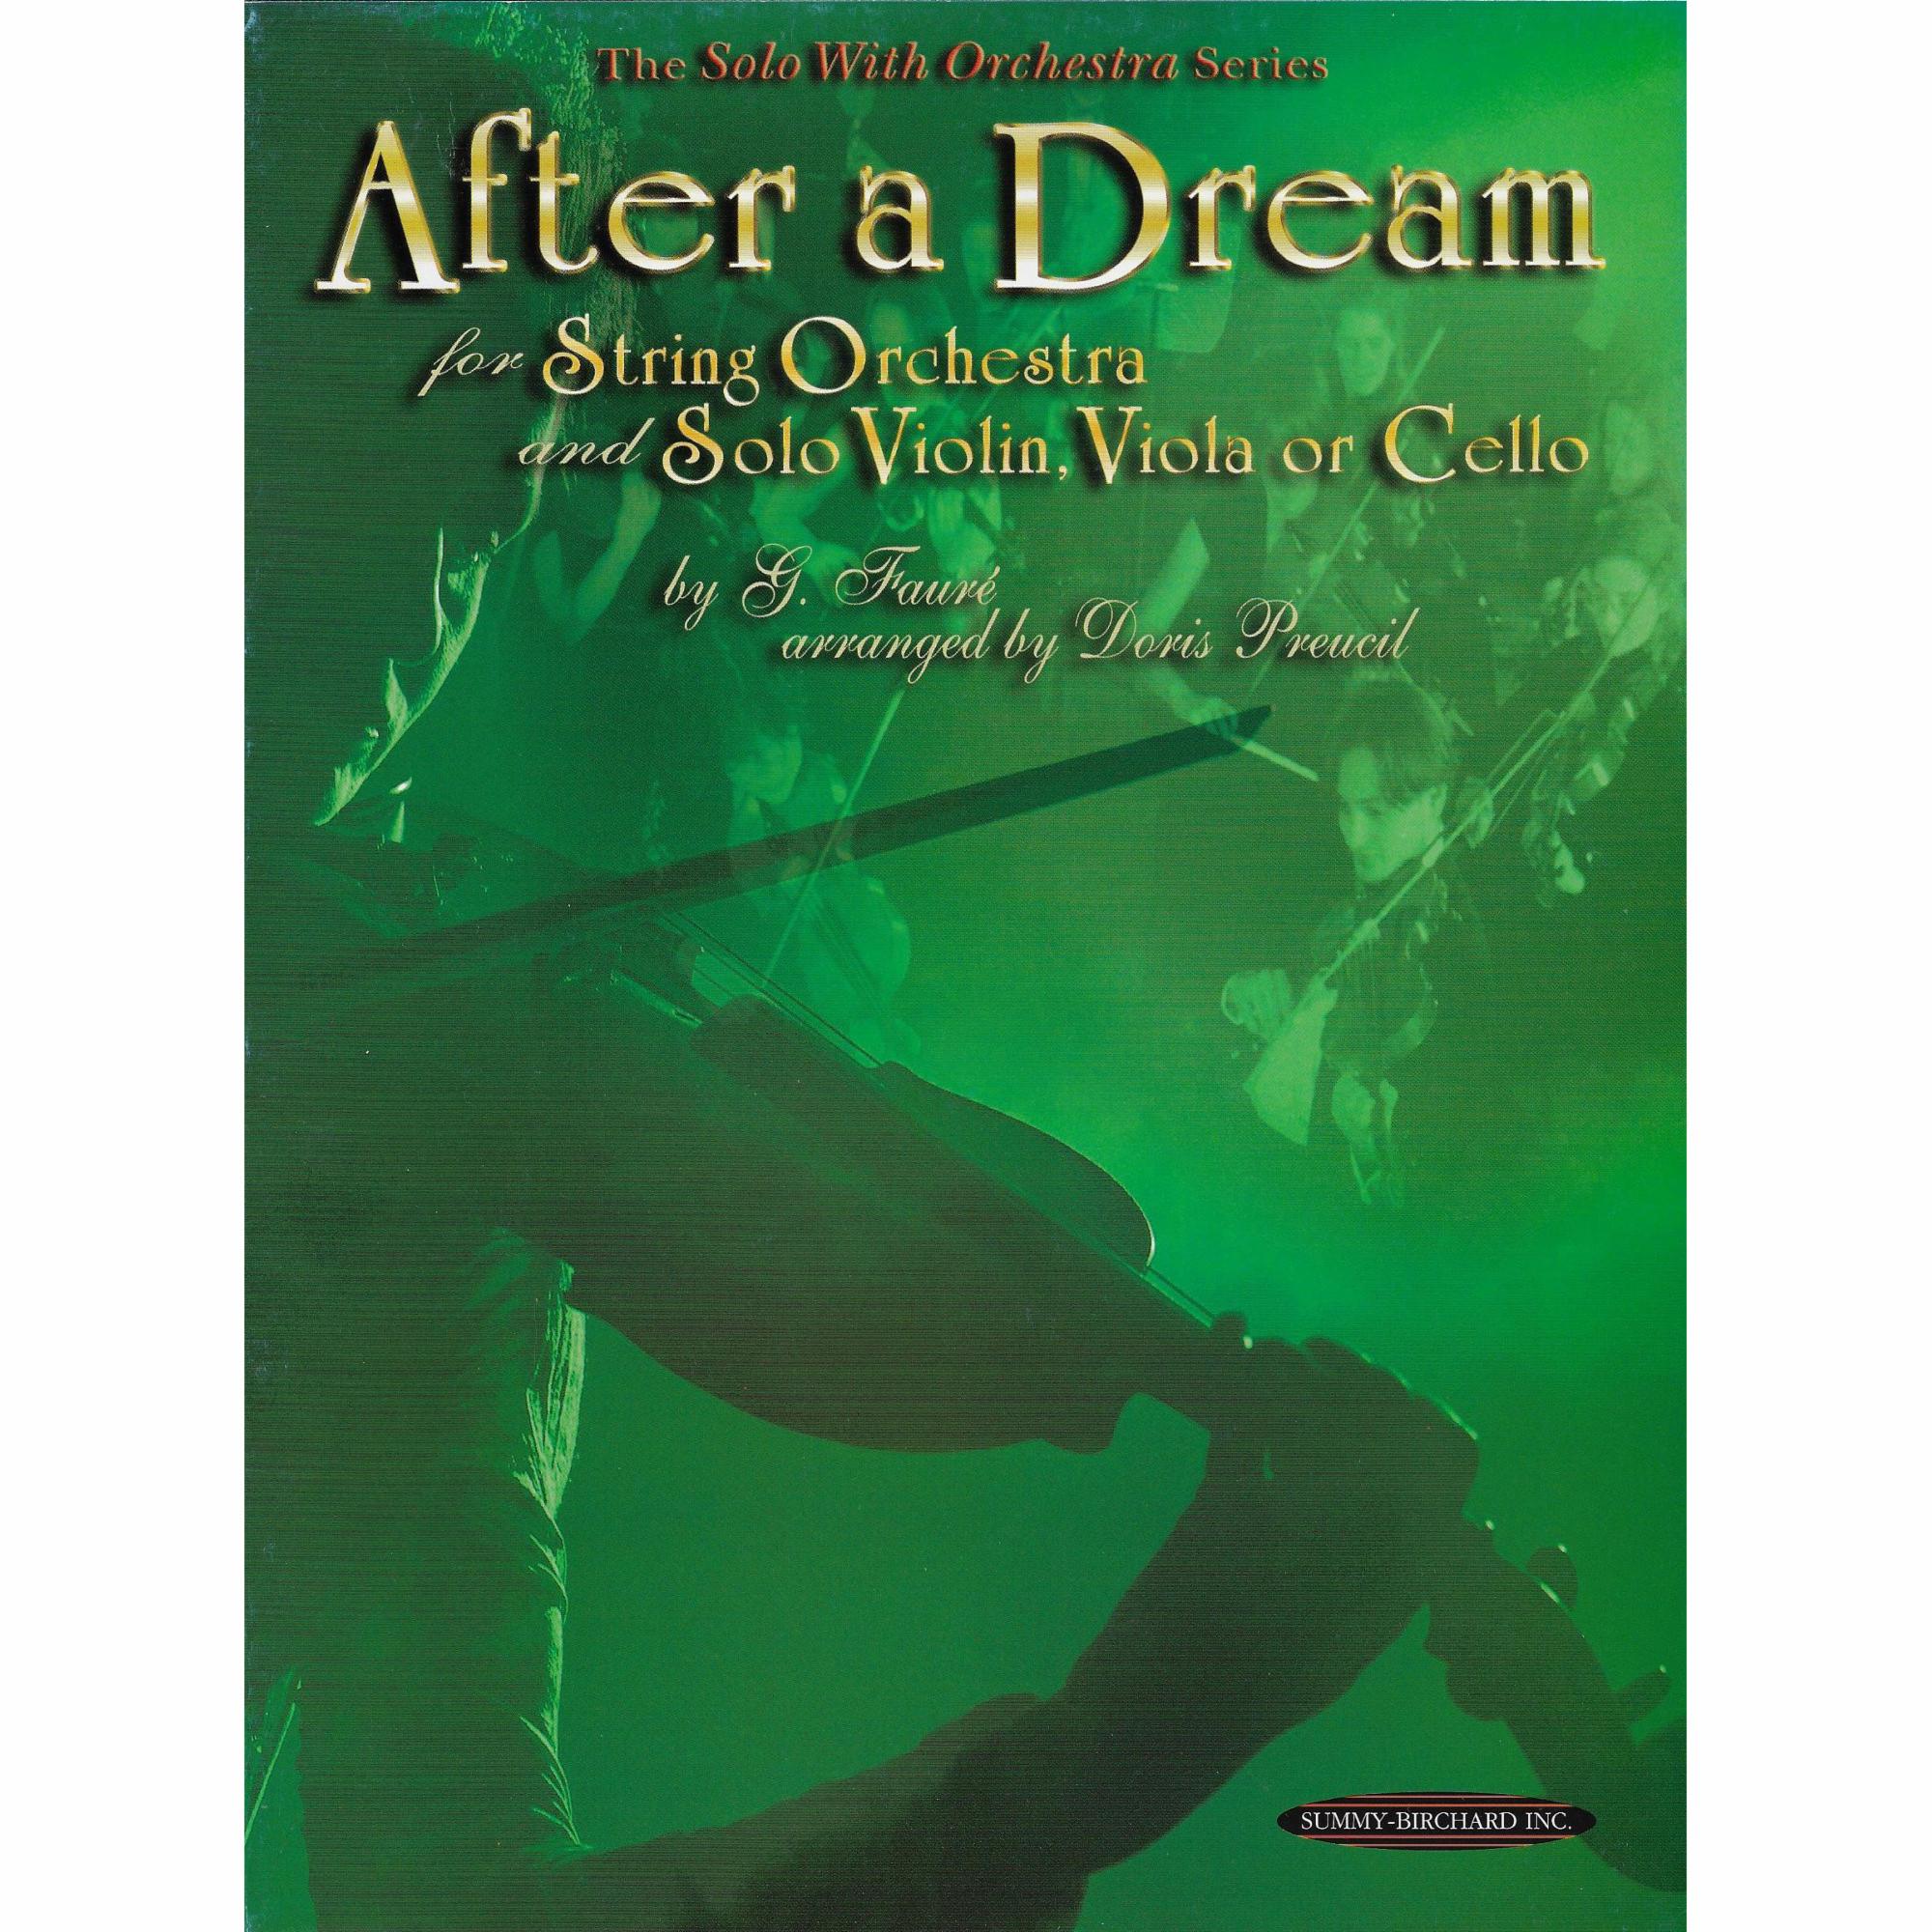 After a Dream for String Orchestra and Solo